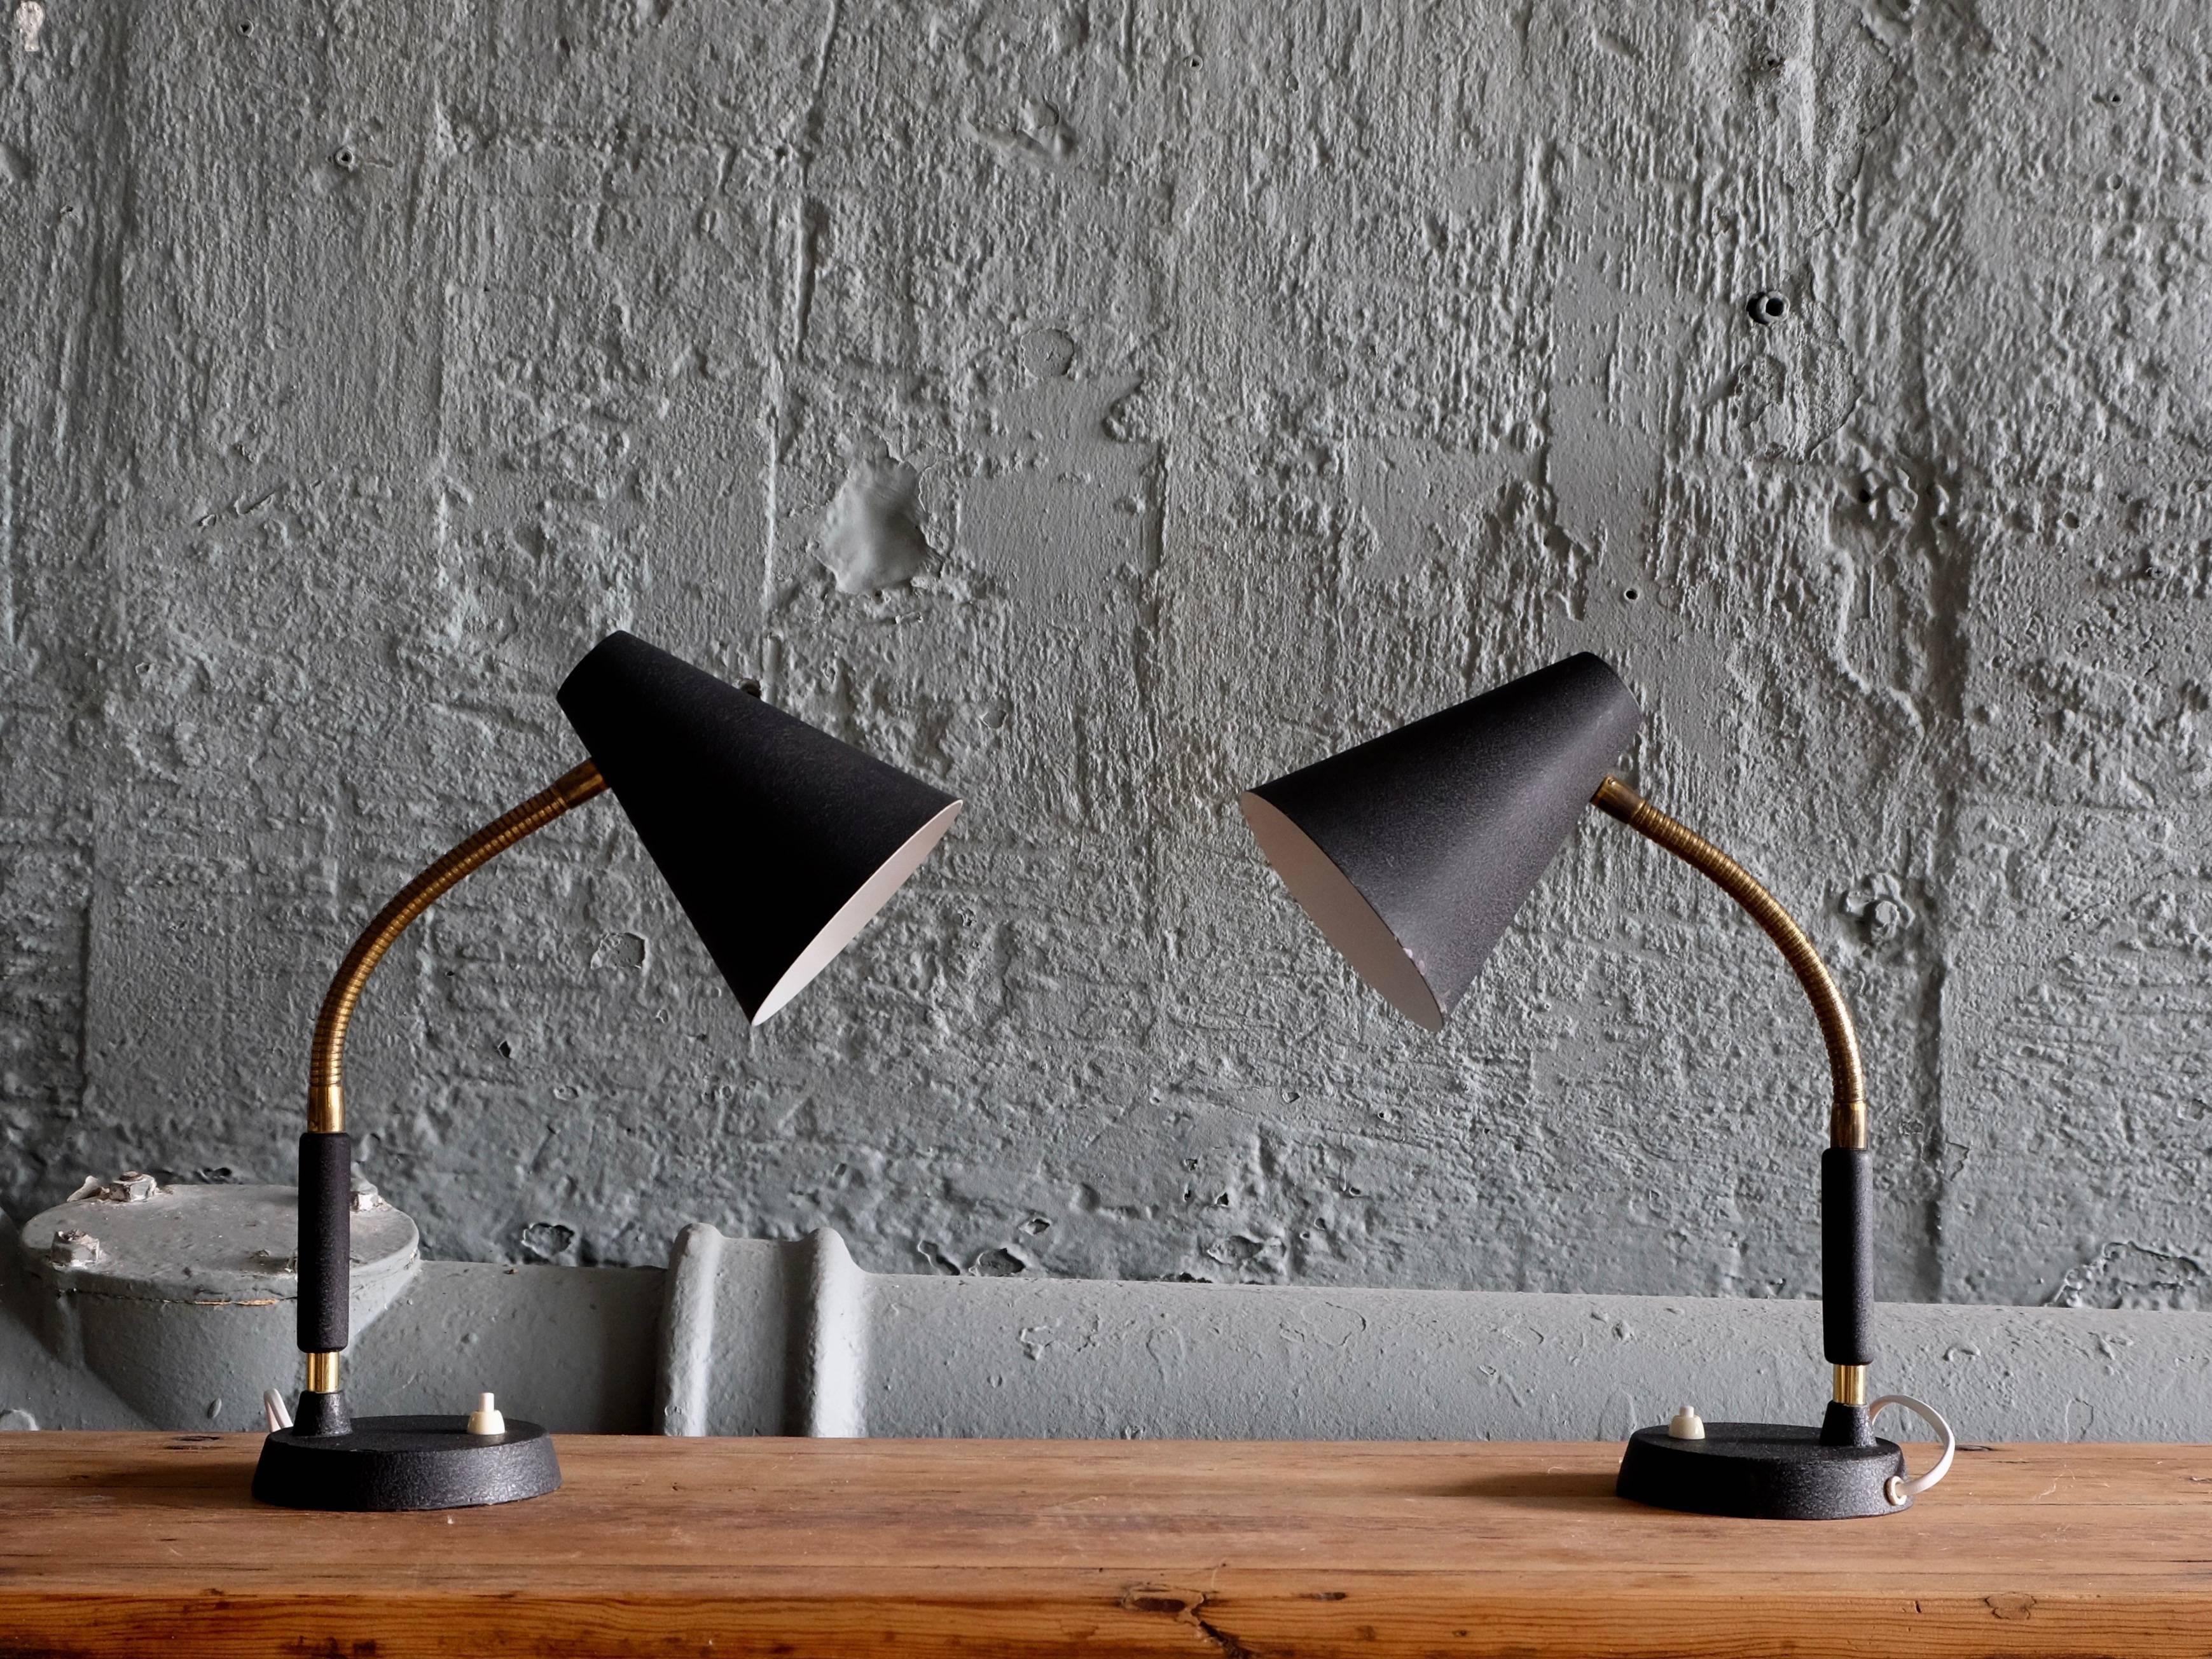 Black lacquered steel and brass.
With signs of usage and patina.
Produced in Sweden, 1950s.